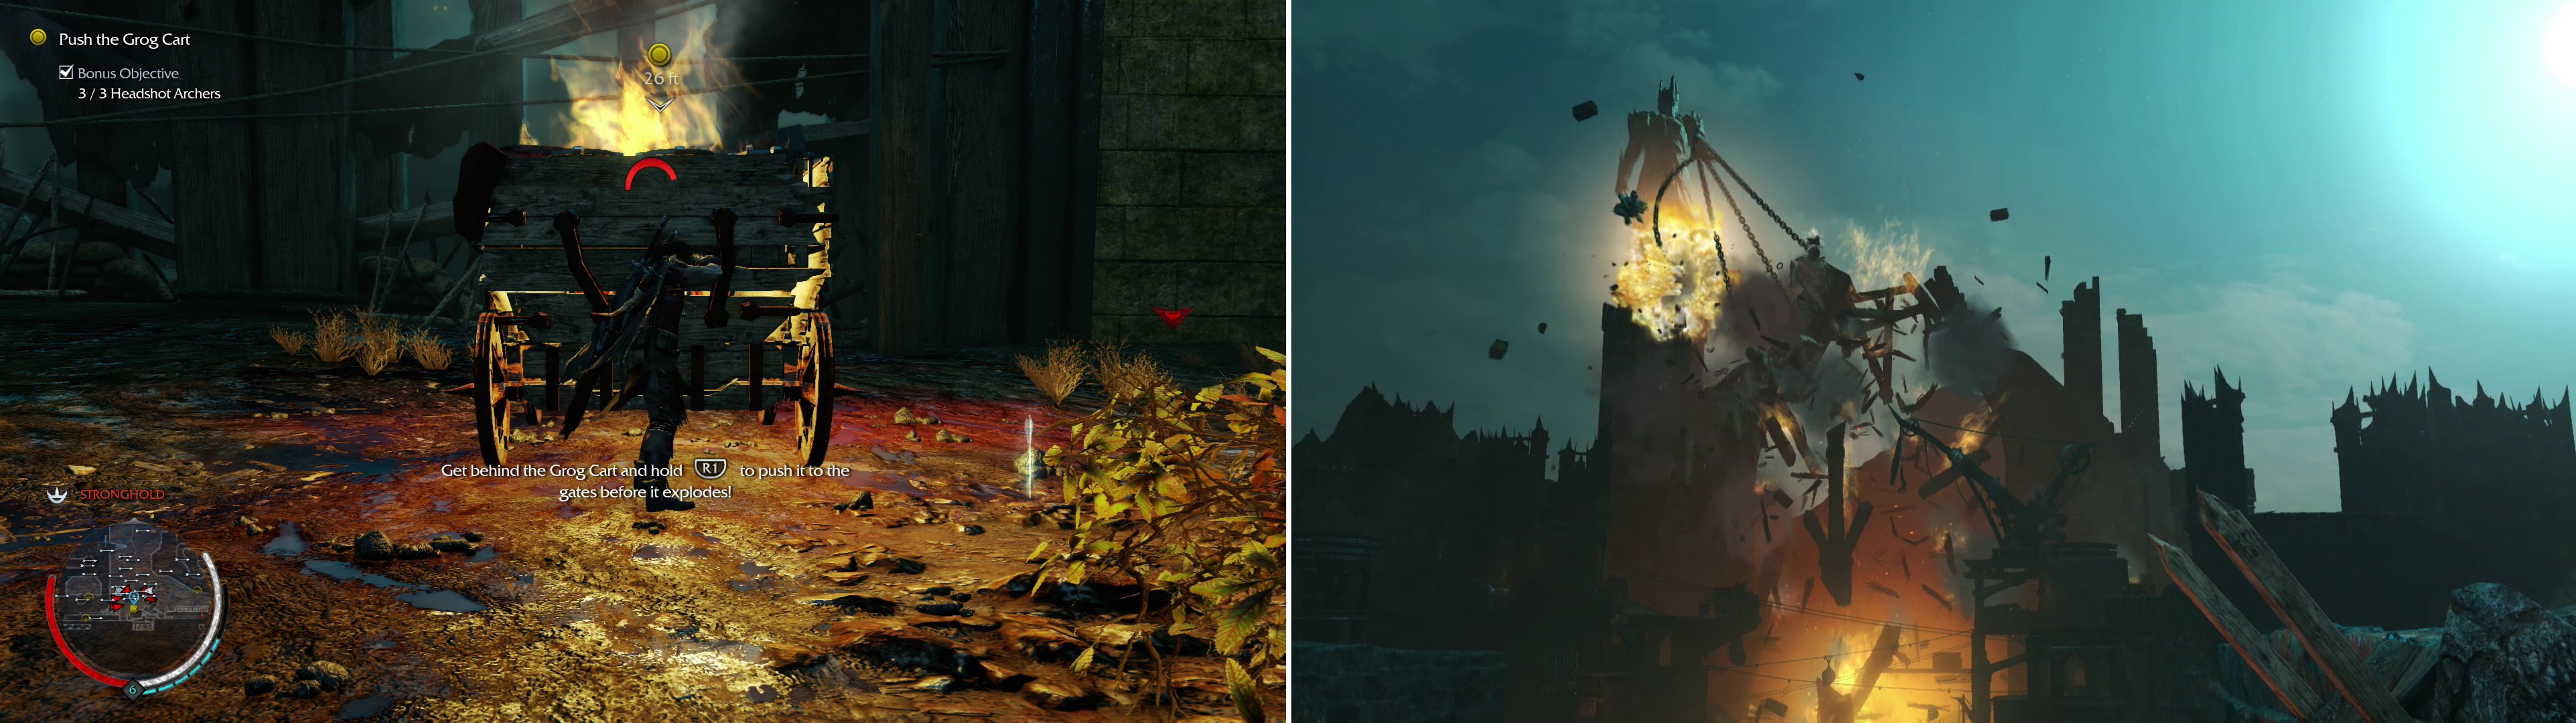 After defending the cart from Uruks, push it the last few feet (left) and watch the destruction of the Monument Gate (right).